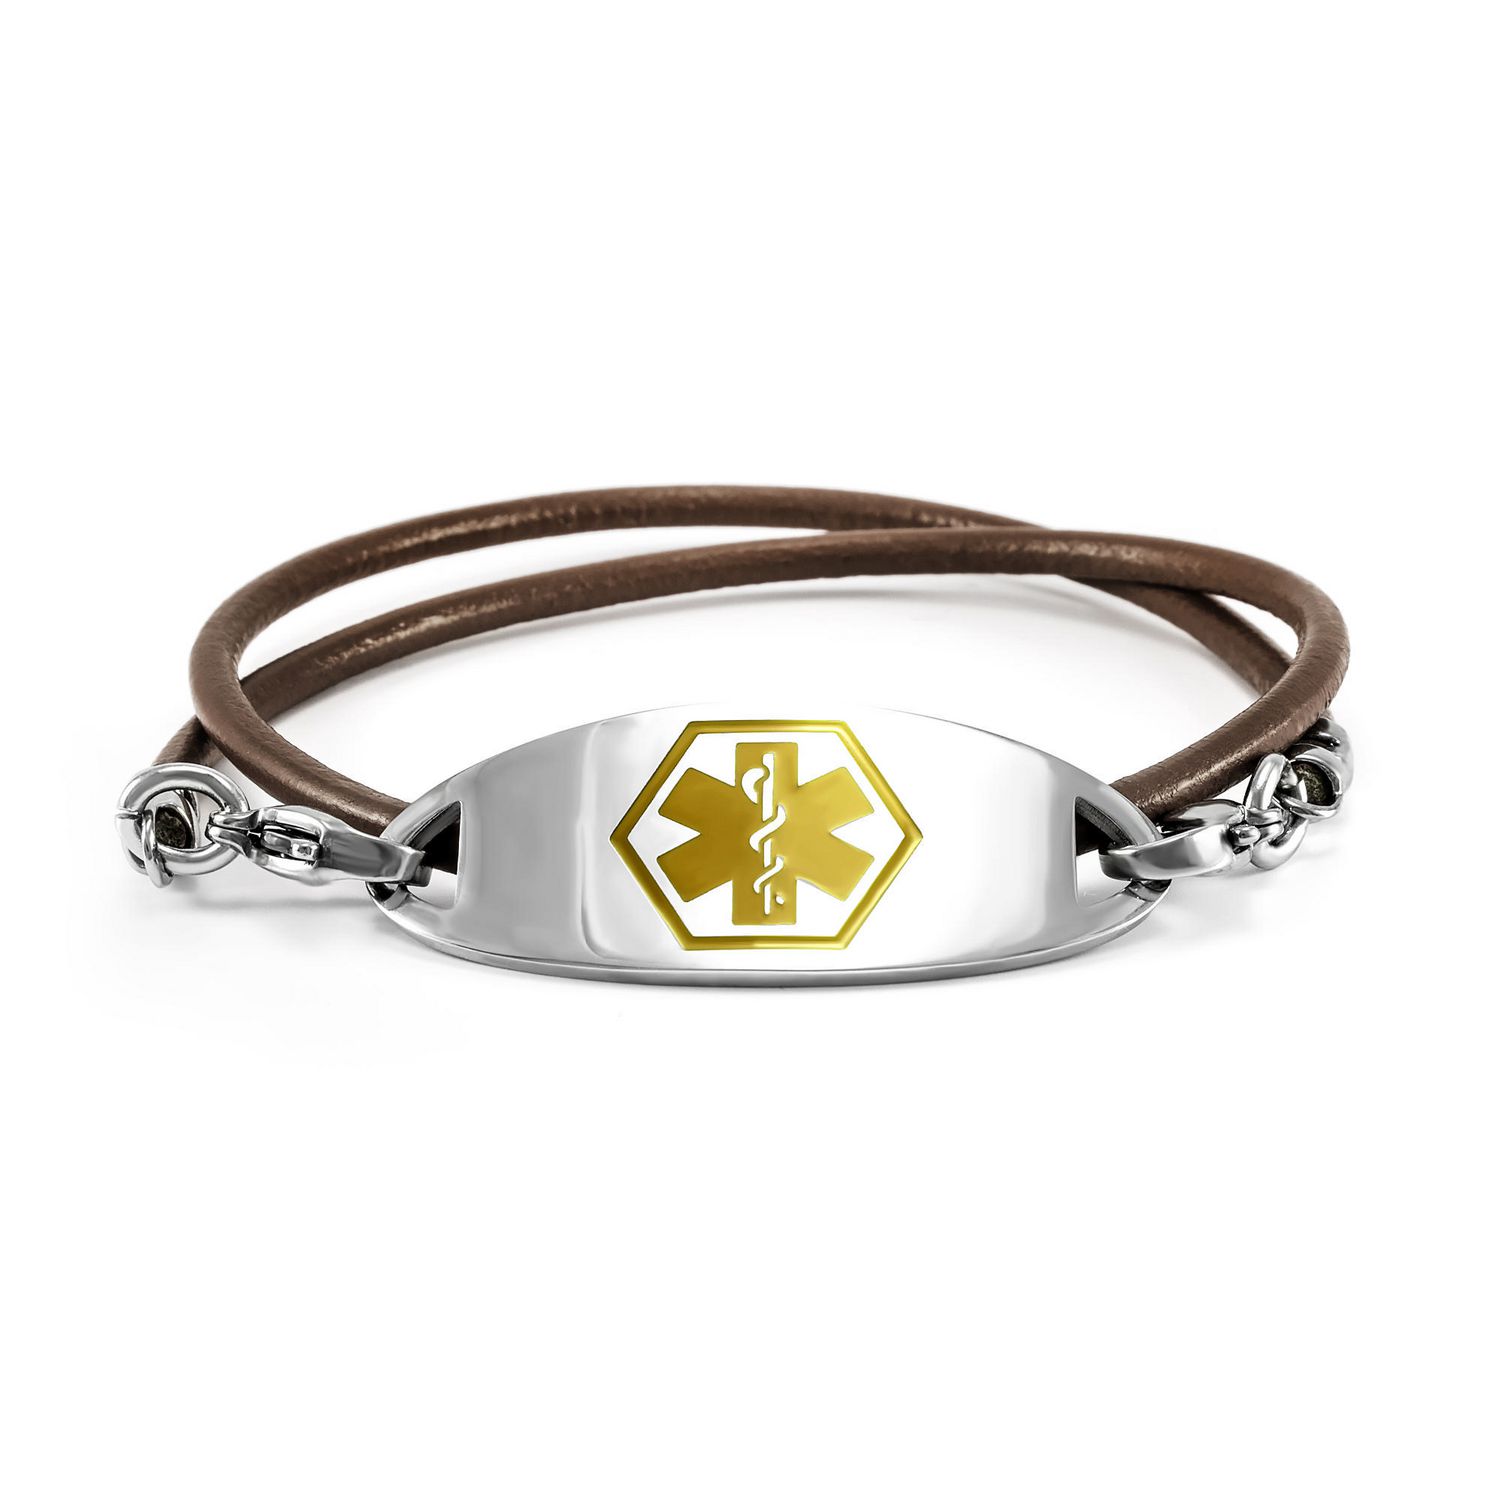 Steel Yellow Enamel Tag Engraving Incl. MedicEngraved Customized Leather Medical ID Bracelet w/ 316L St